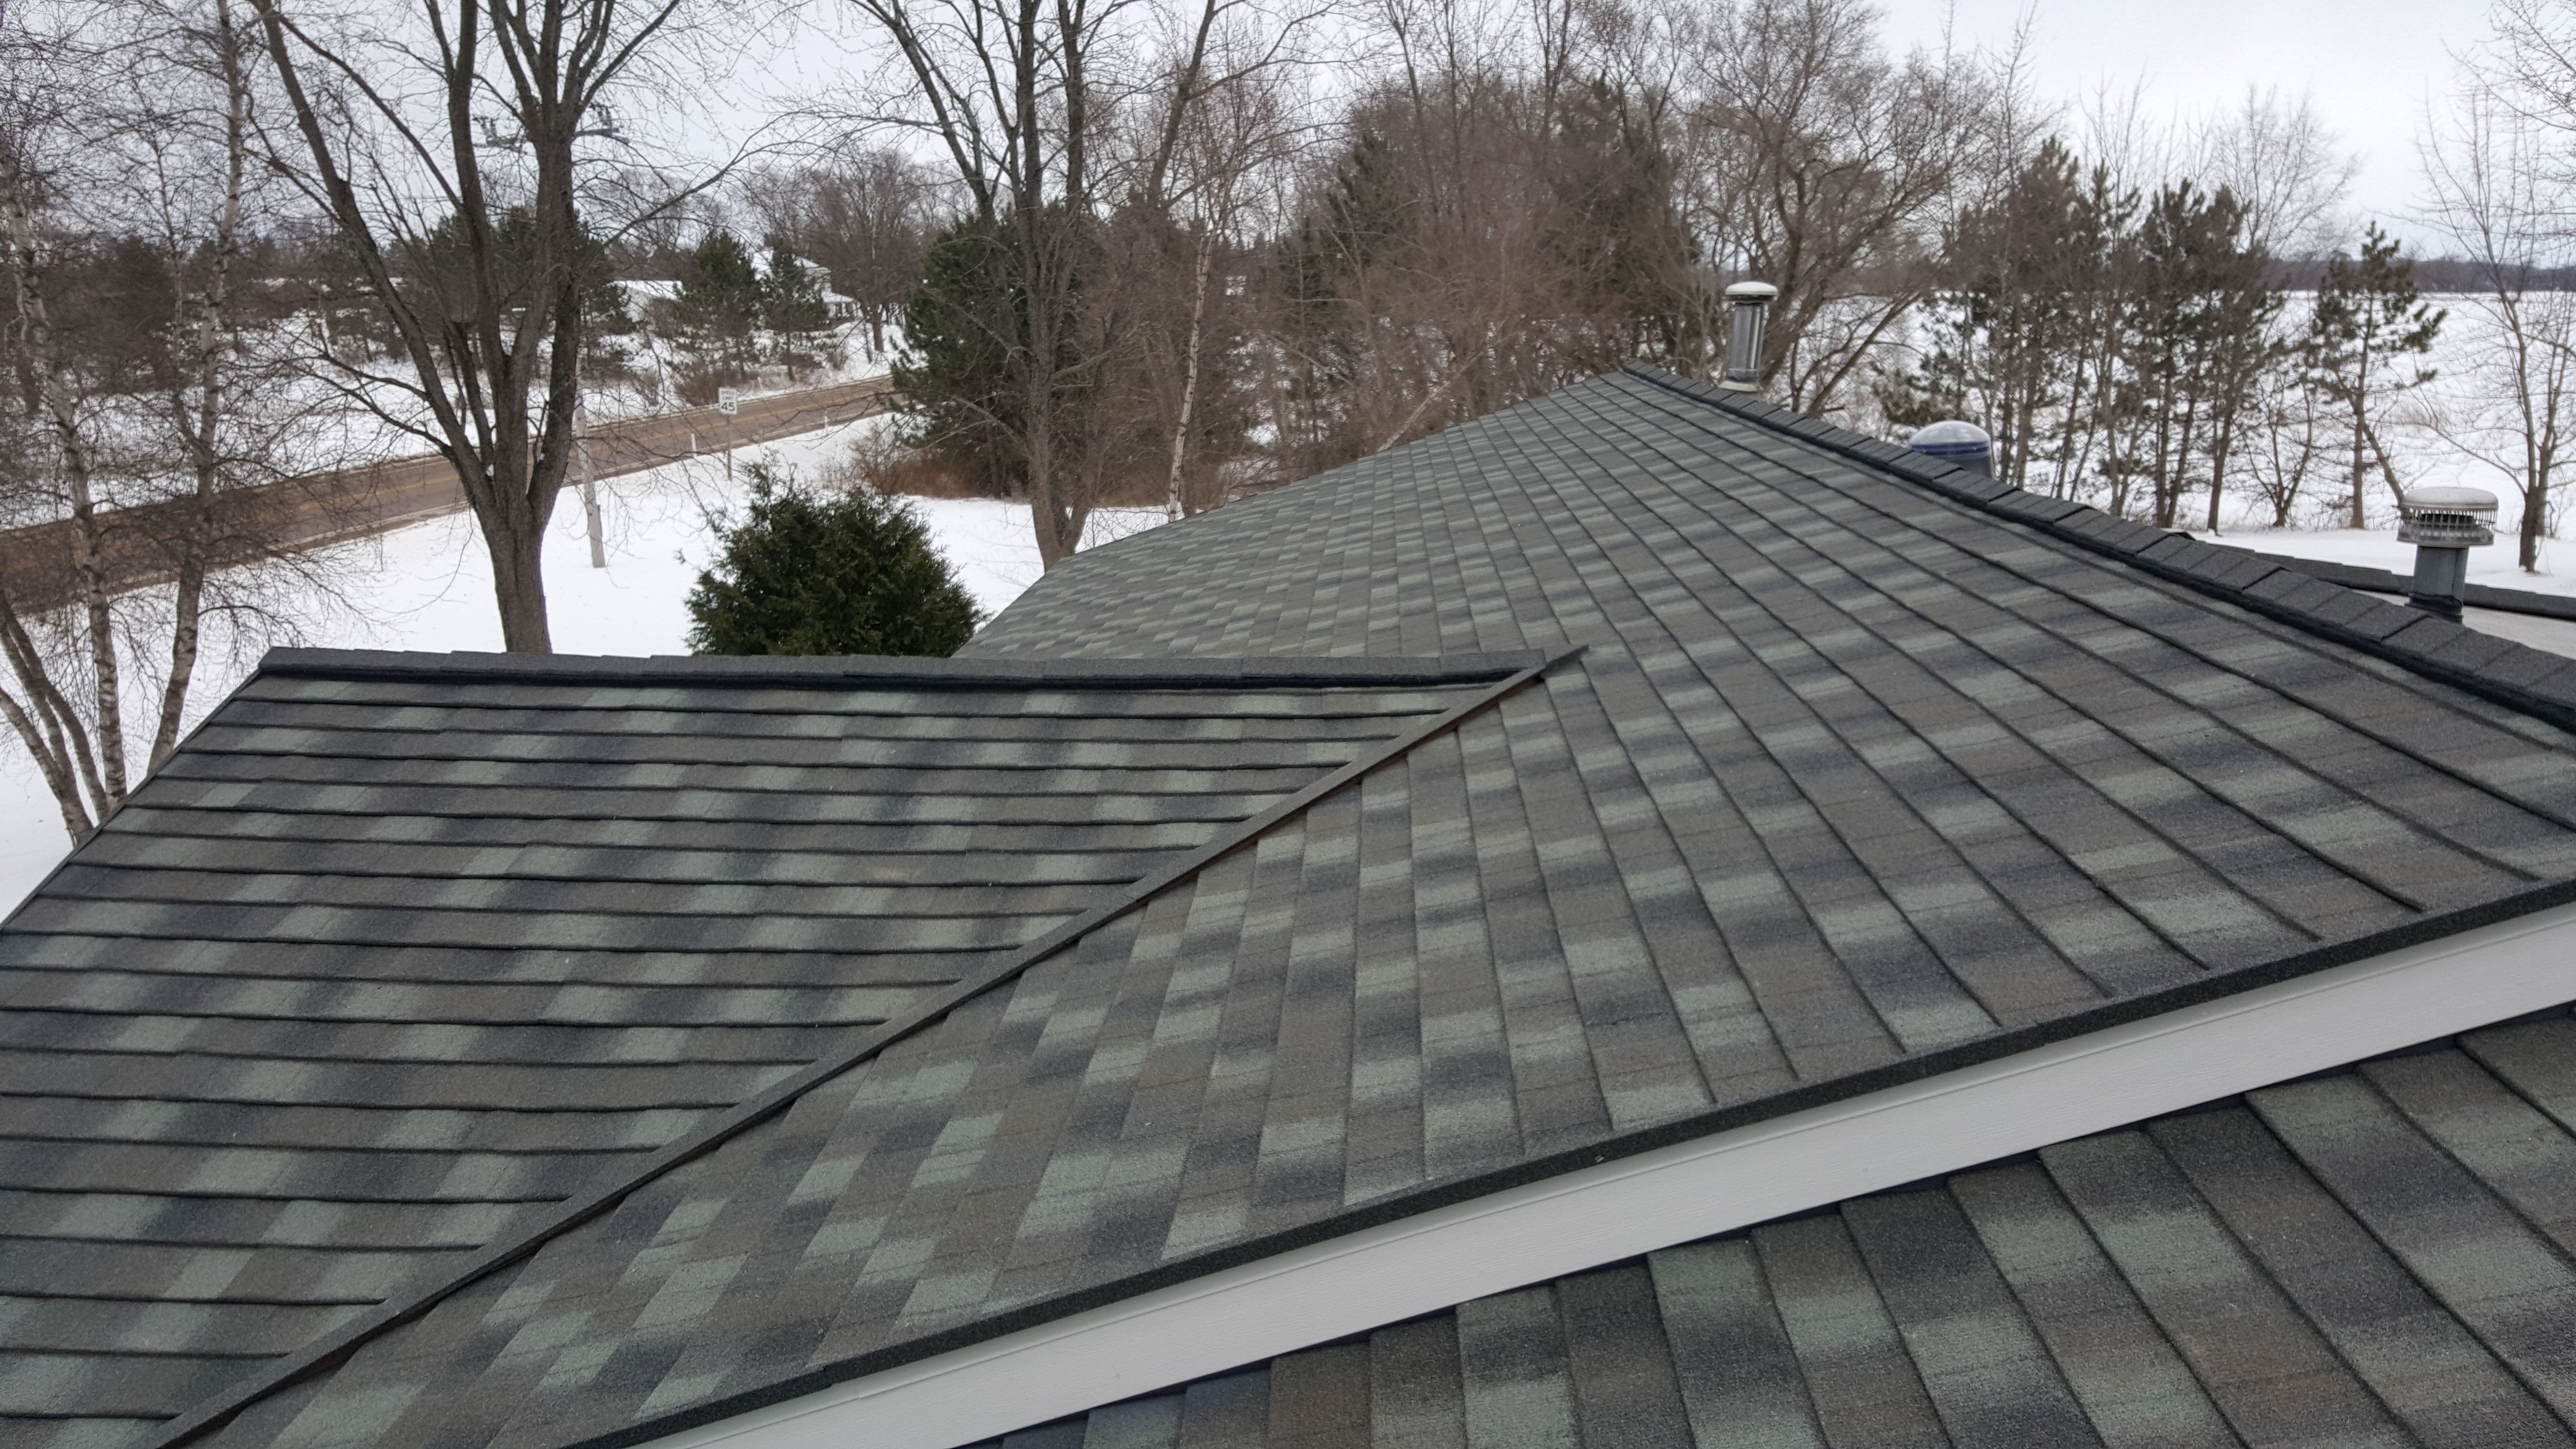 Stone Coated Steel - Decra Shingle XD Roof Replacement In Stevens Point